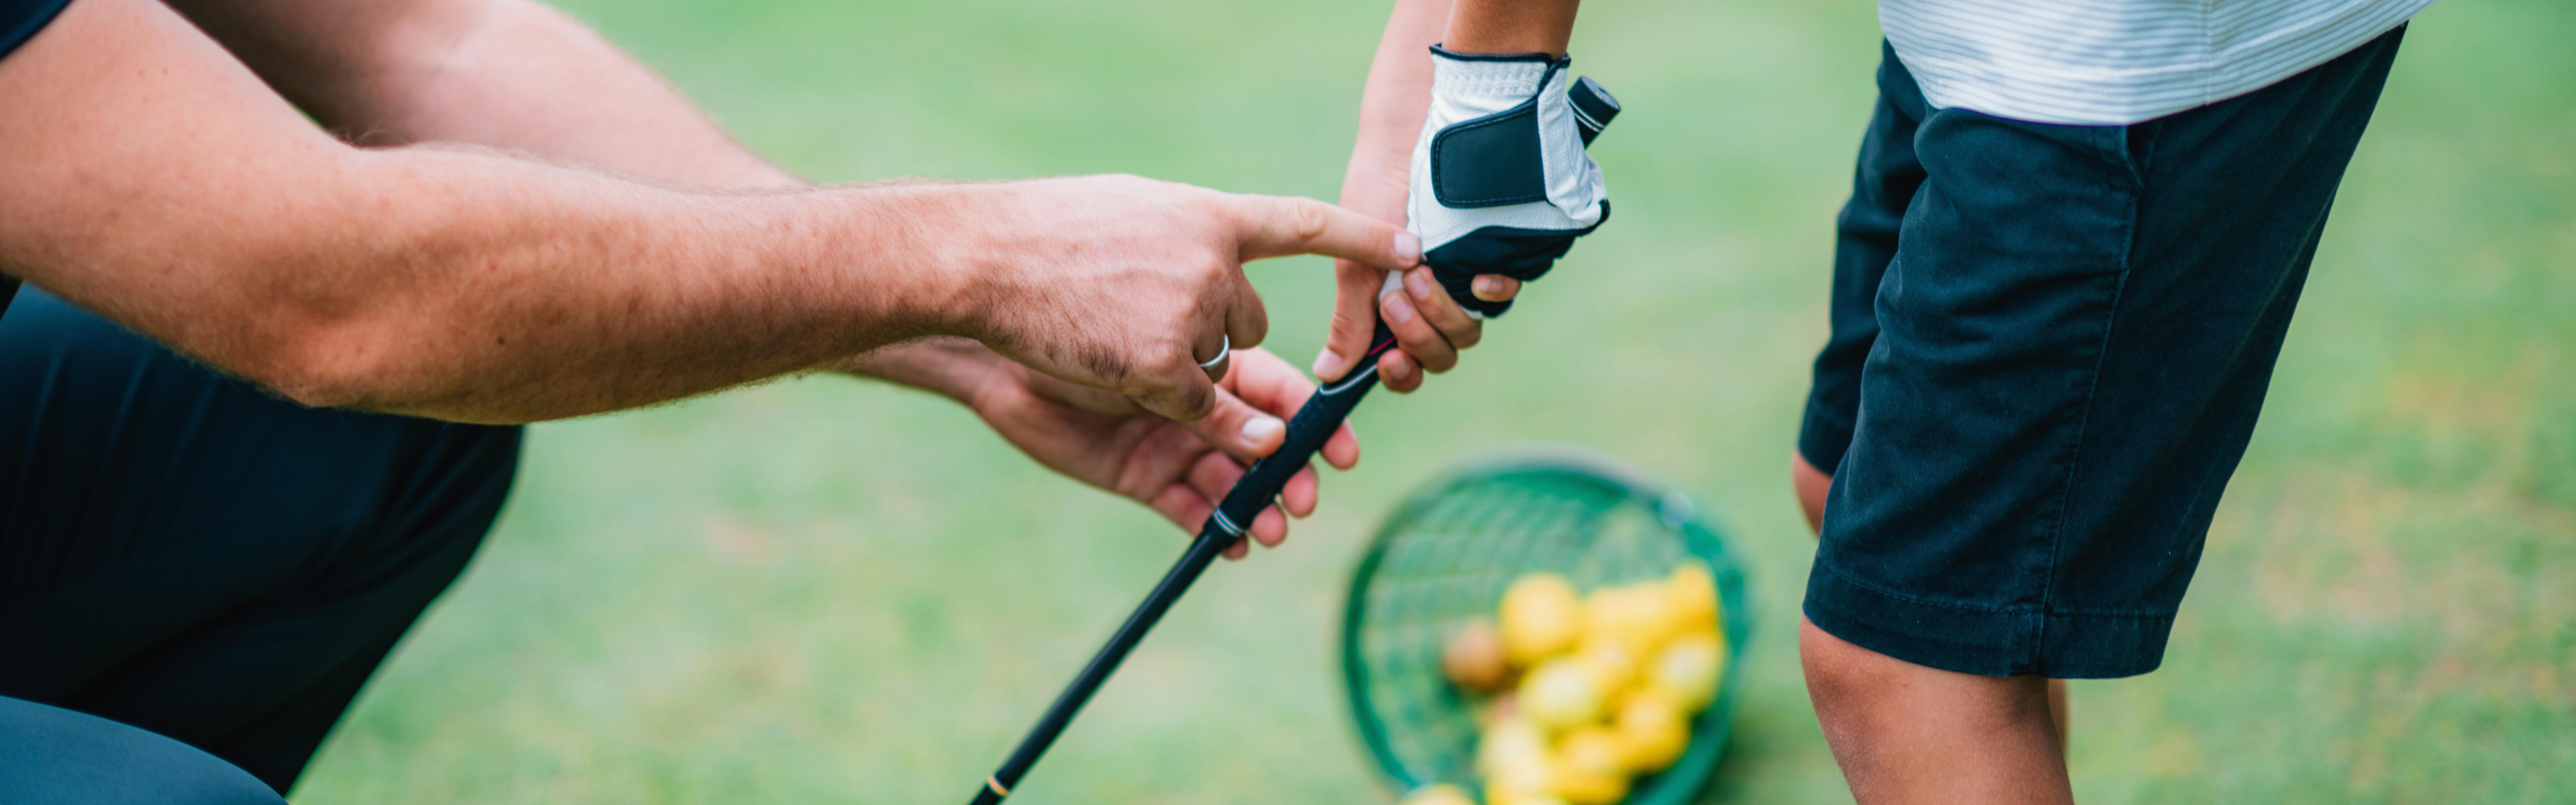 One set of hands teaching someone holding a golf club how to have proper hand placement. There is a bucket of golf balls in the background. 